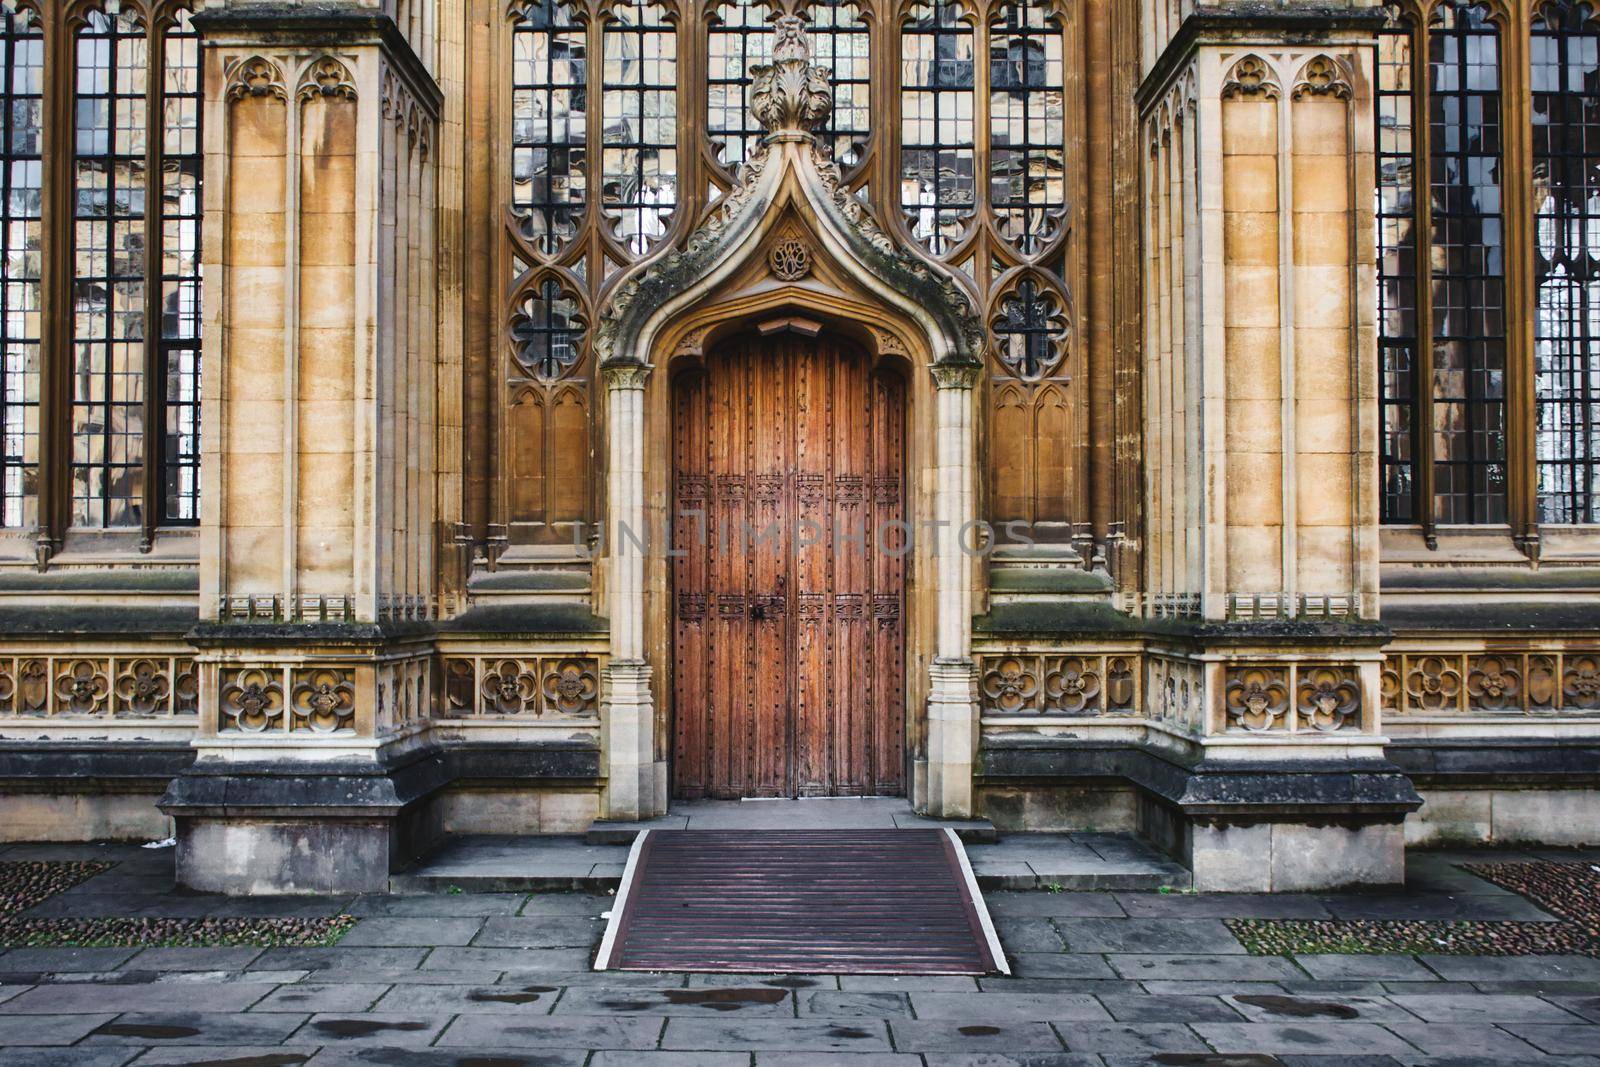 Oxford, UK - March 02 2020: Exterior of the Divinity School in Oxford showing a big wooden door entrance and columns and stained glass windows